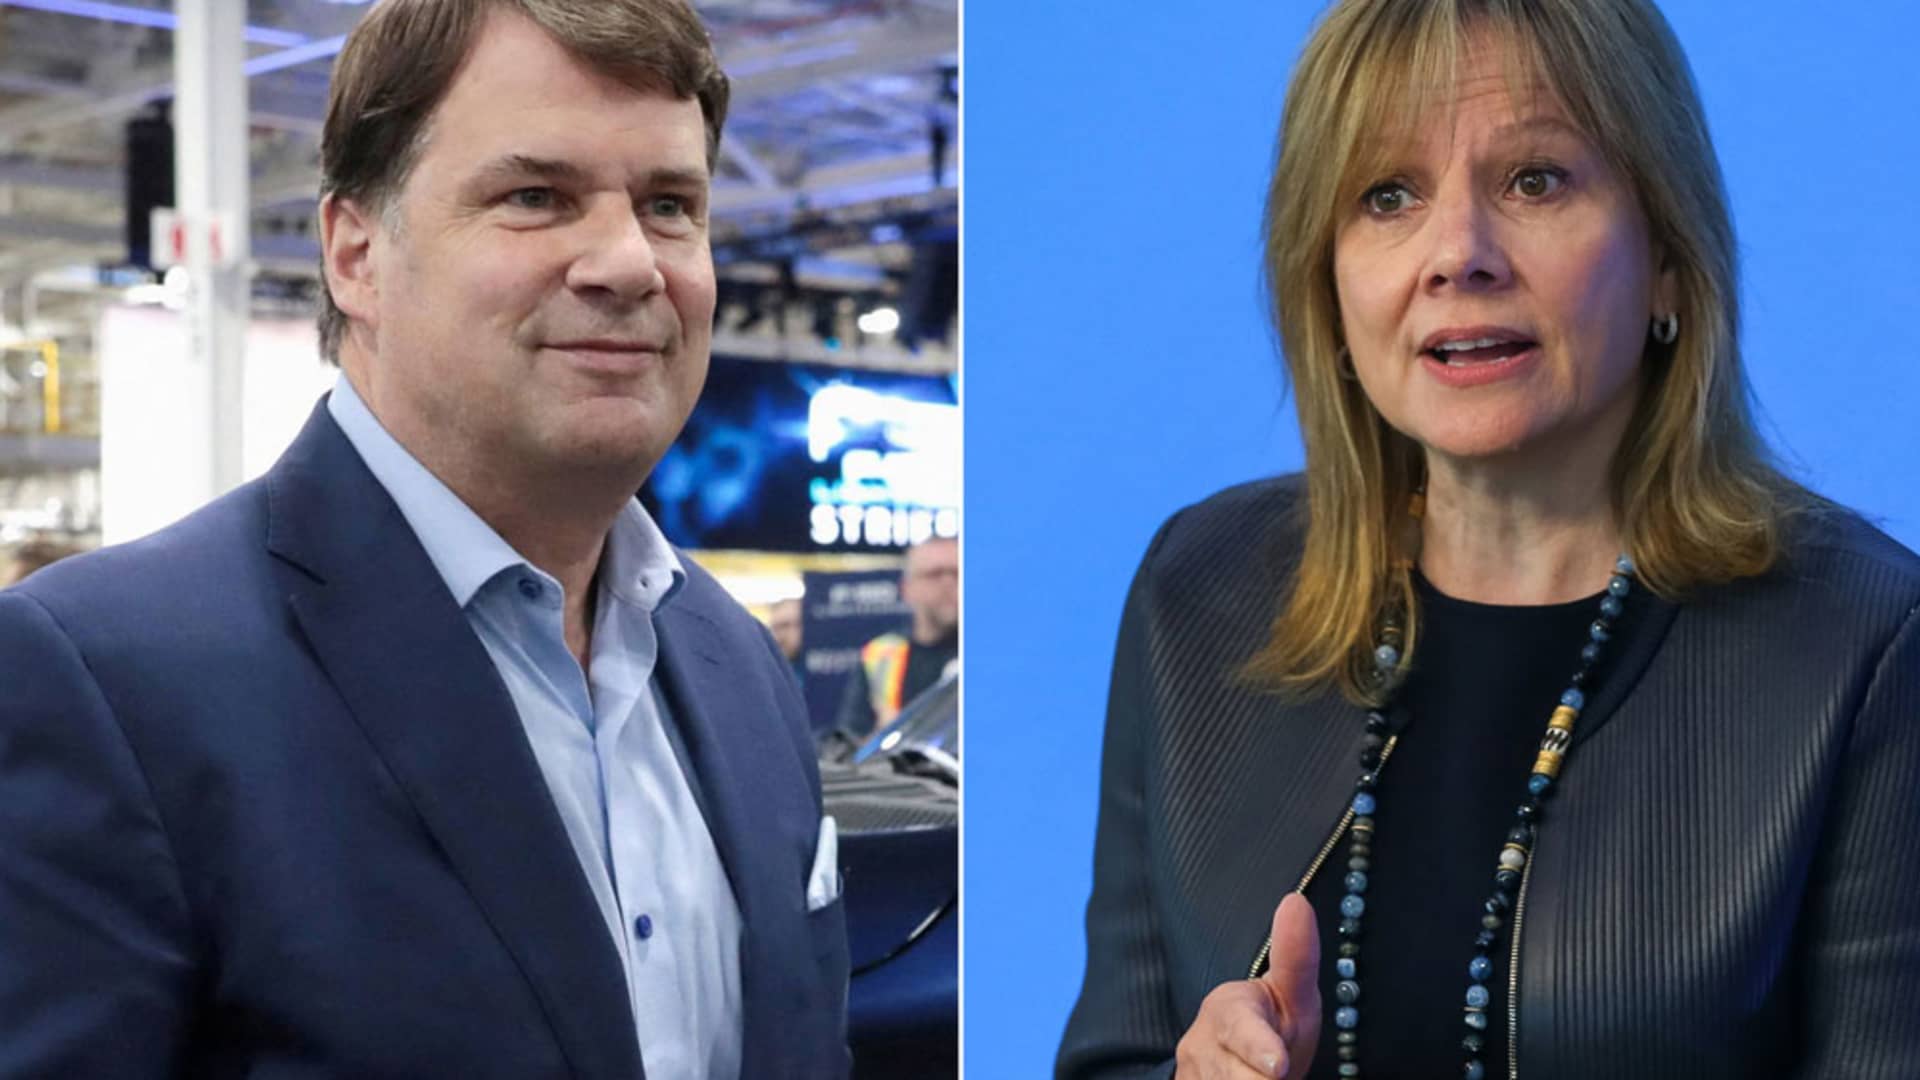 Detroit rivalry remains even as GM, Ford and Stellantis take on Tesla